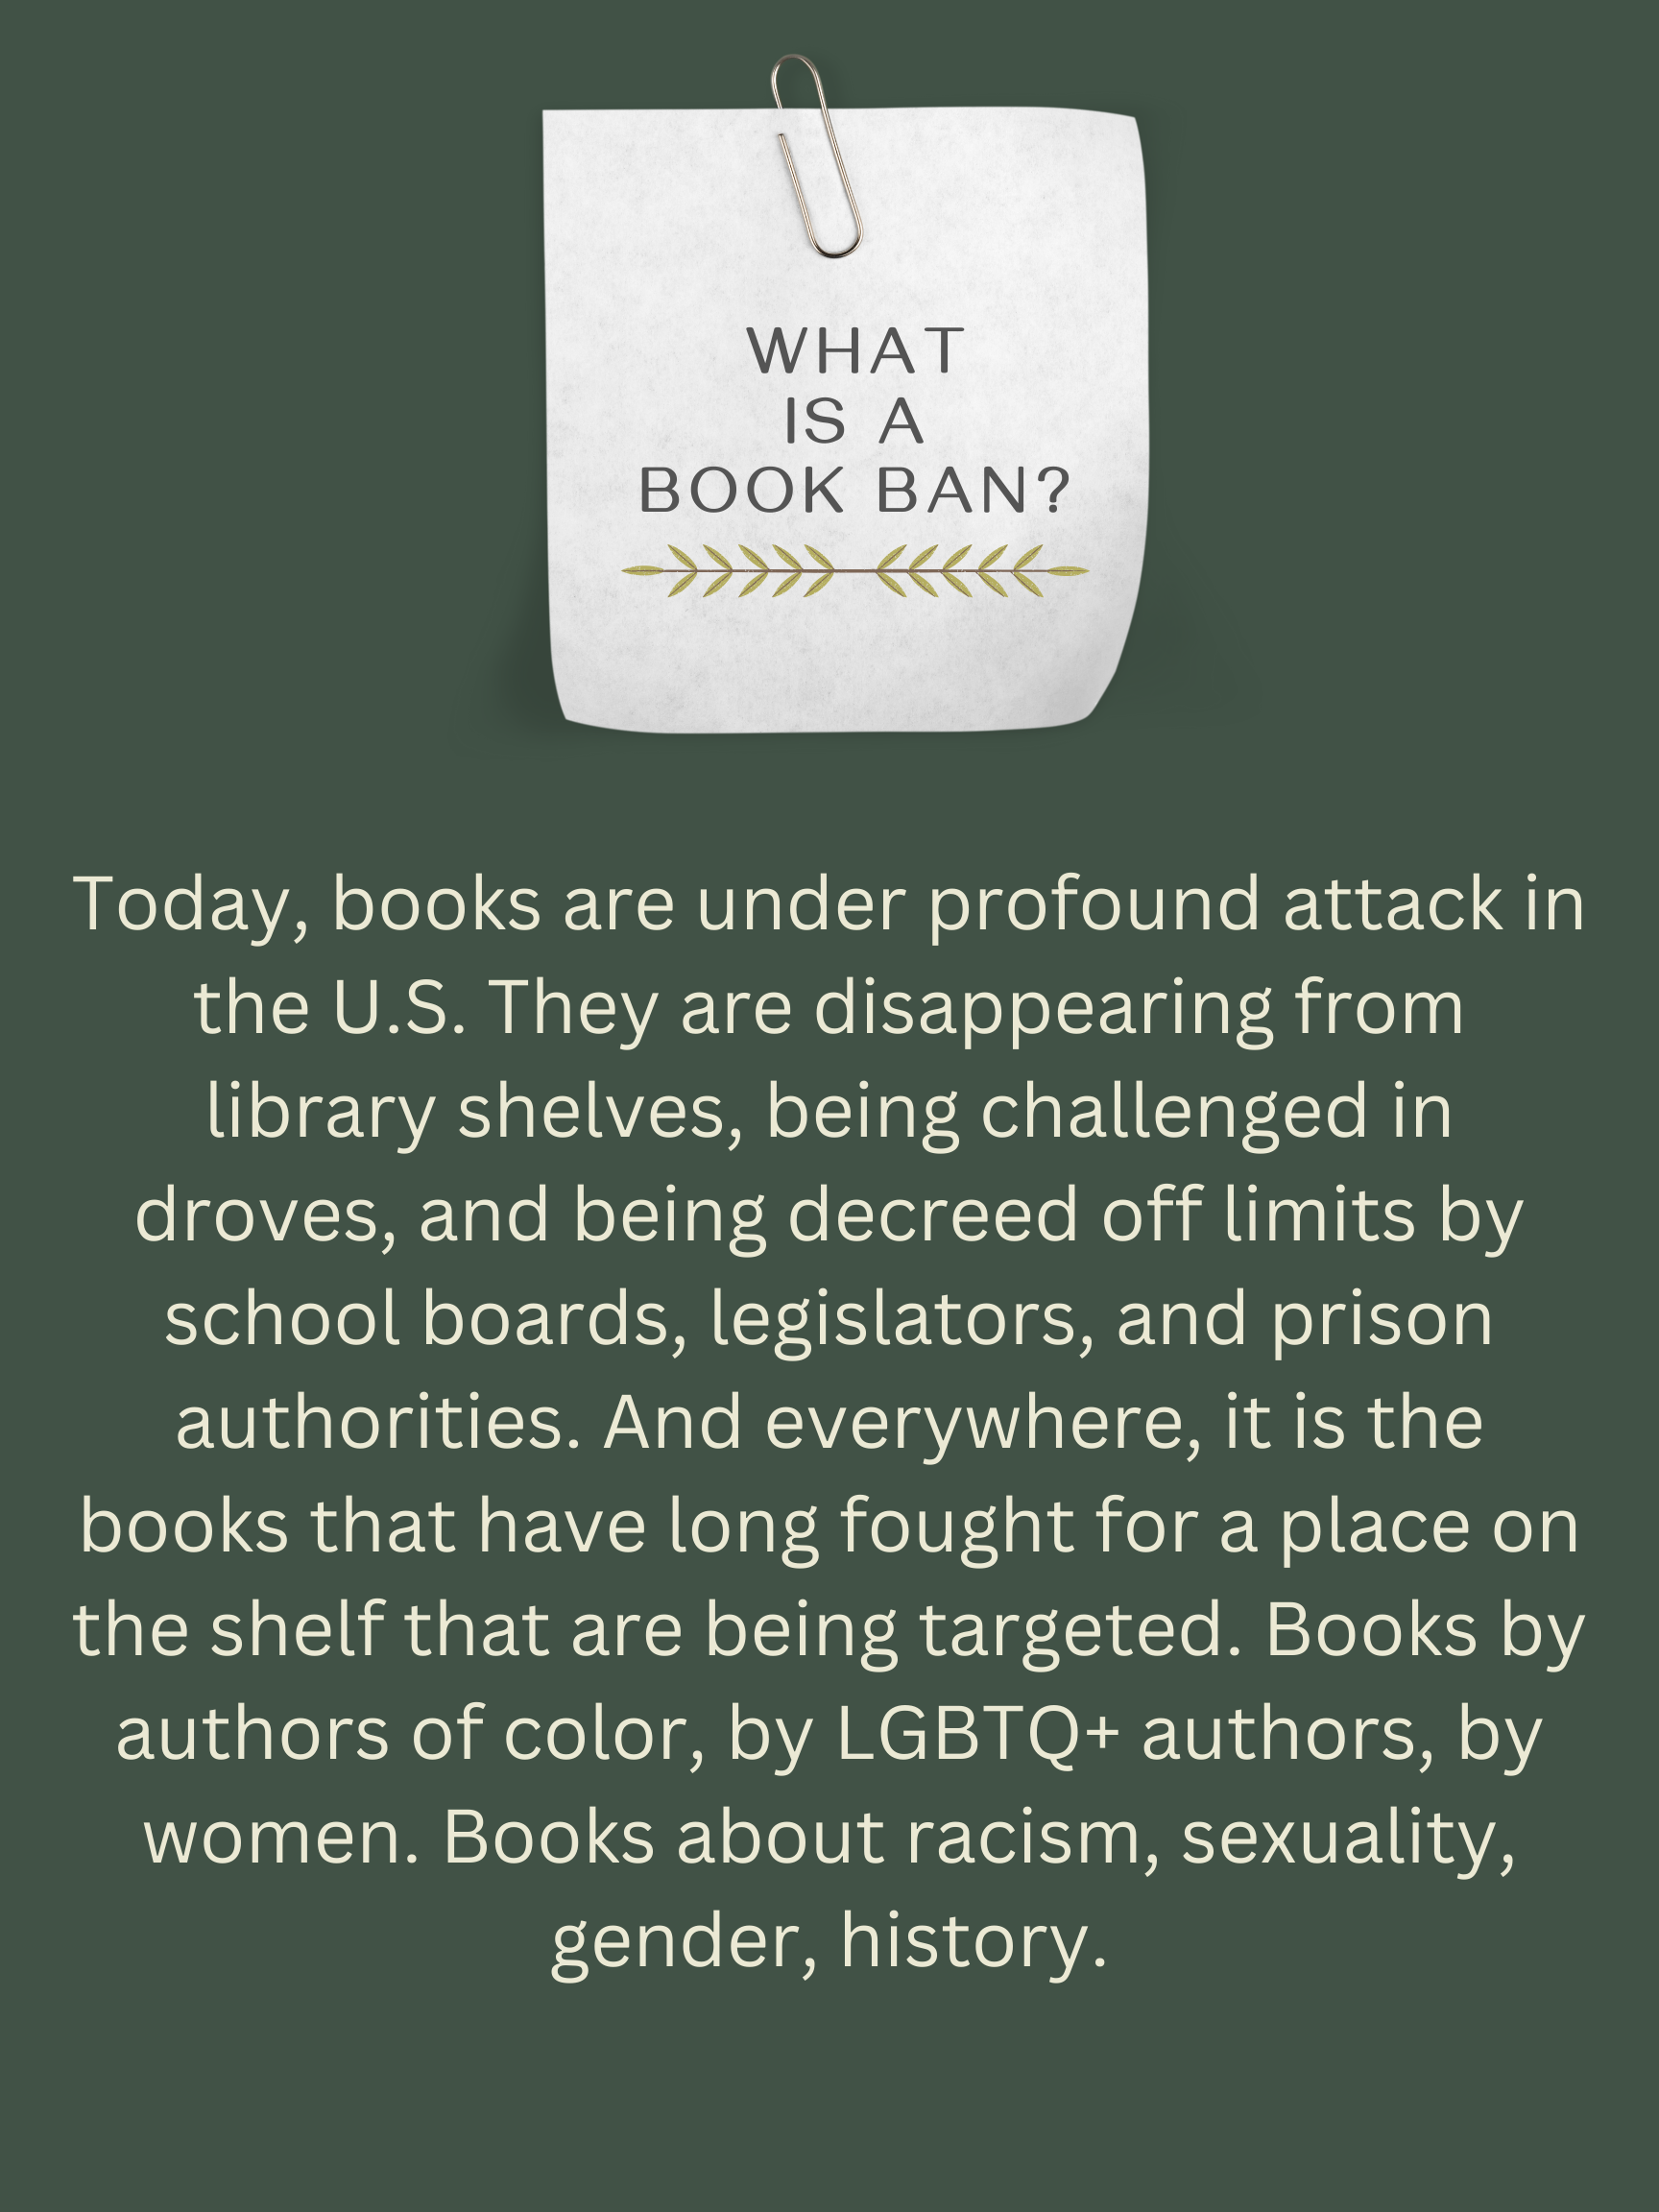 What-is-a-book-ban-info